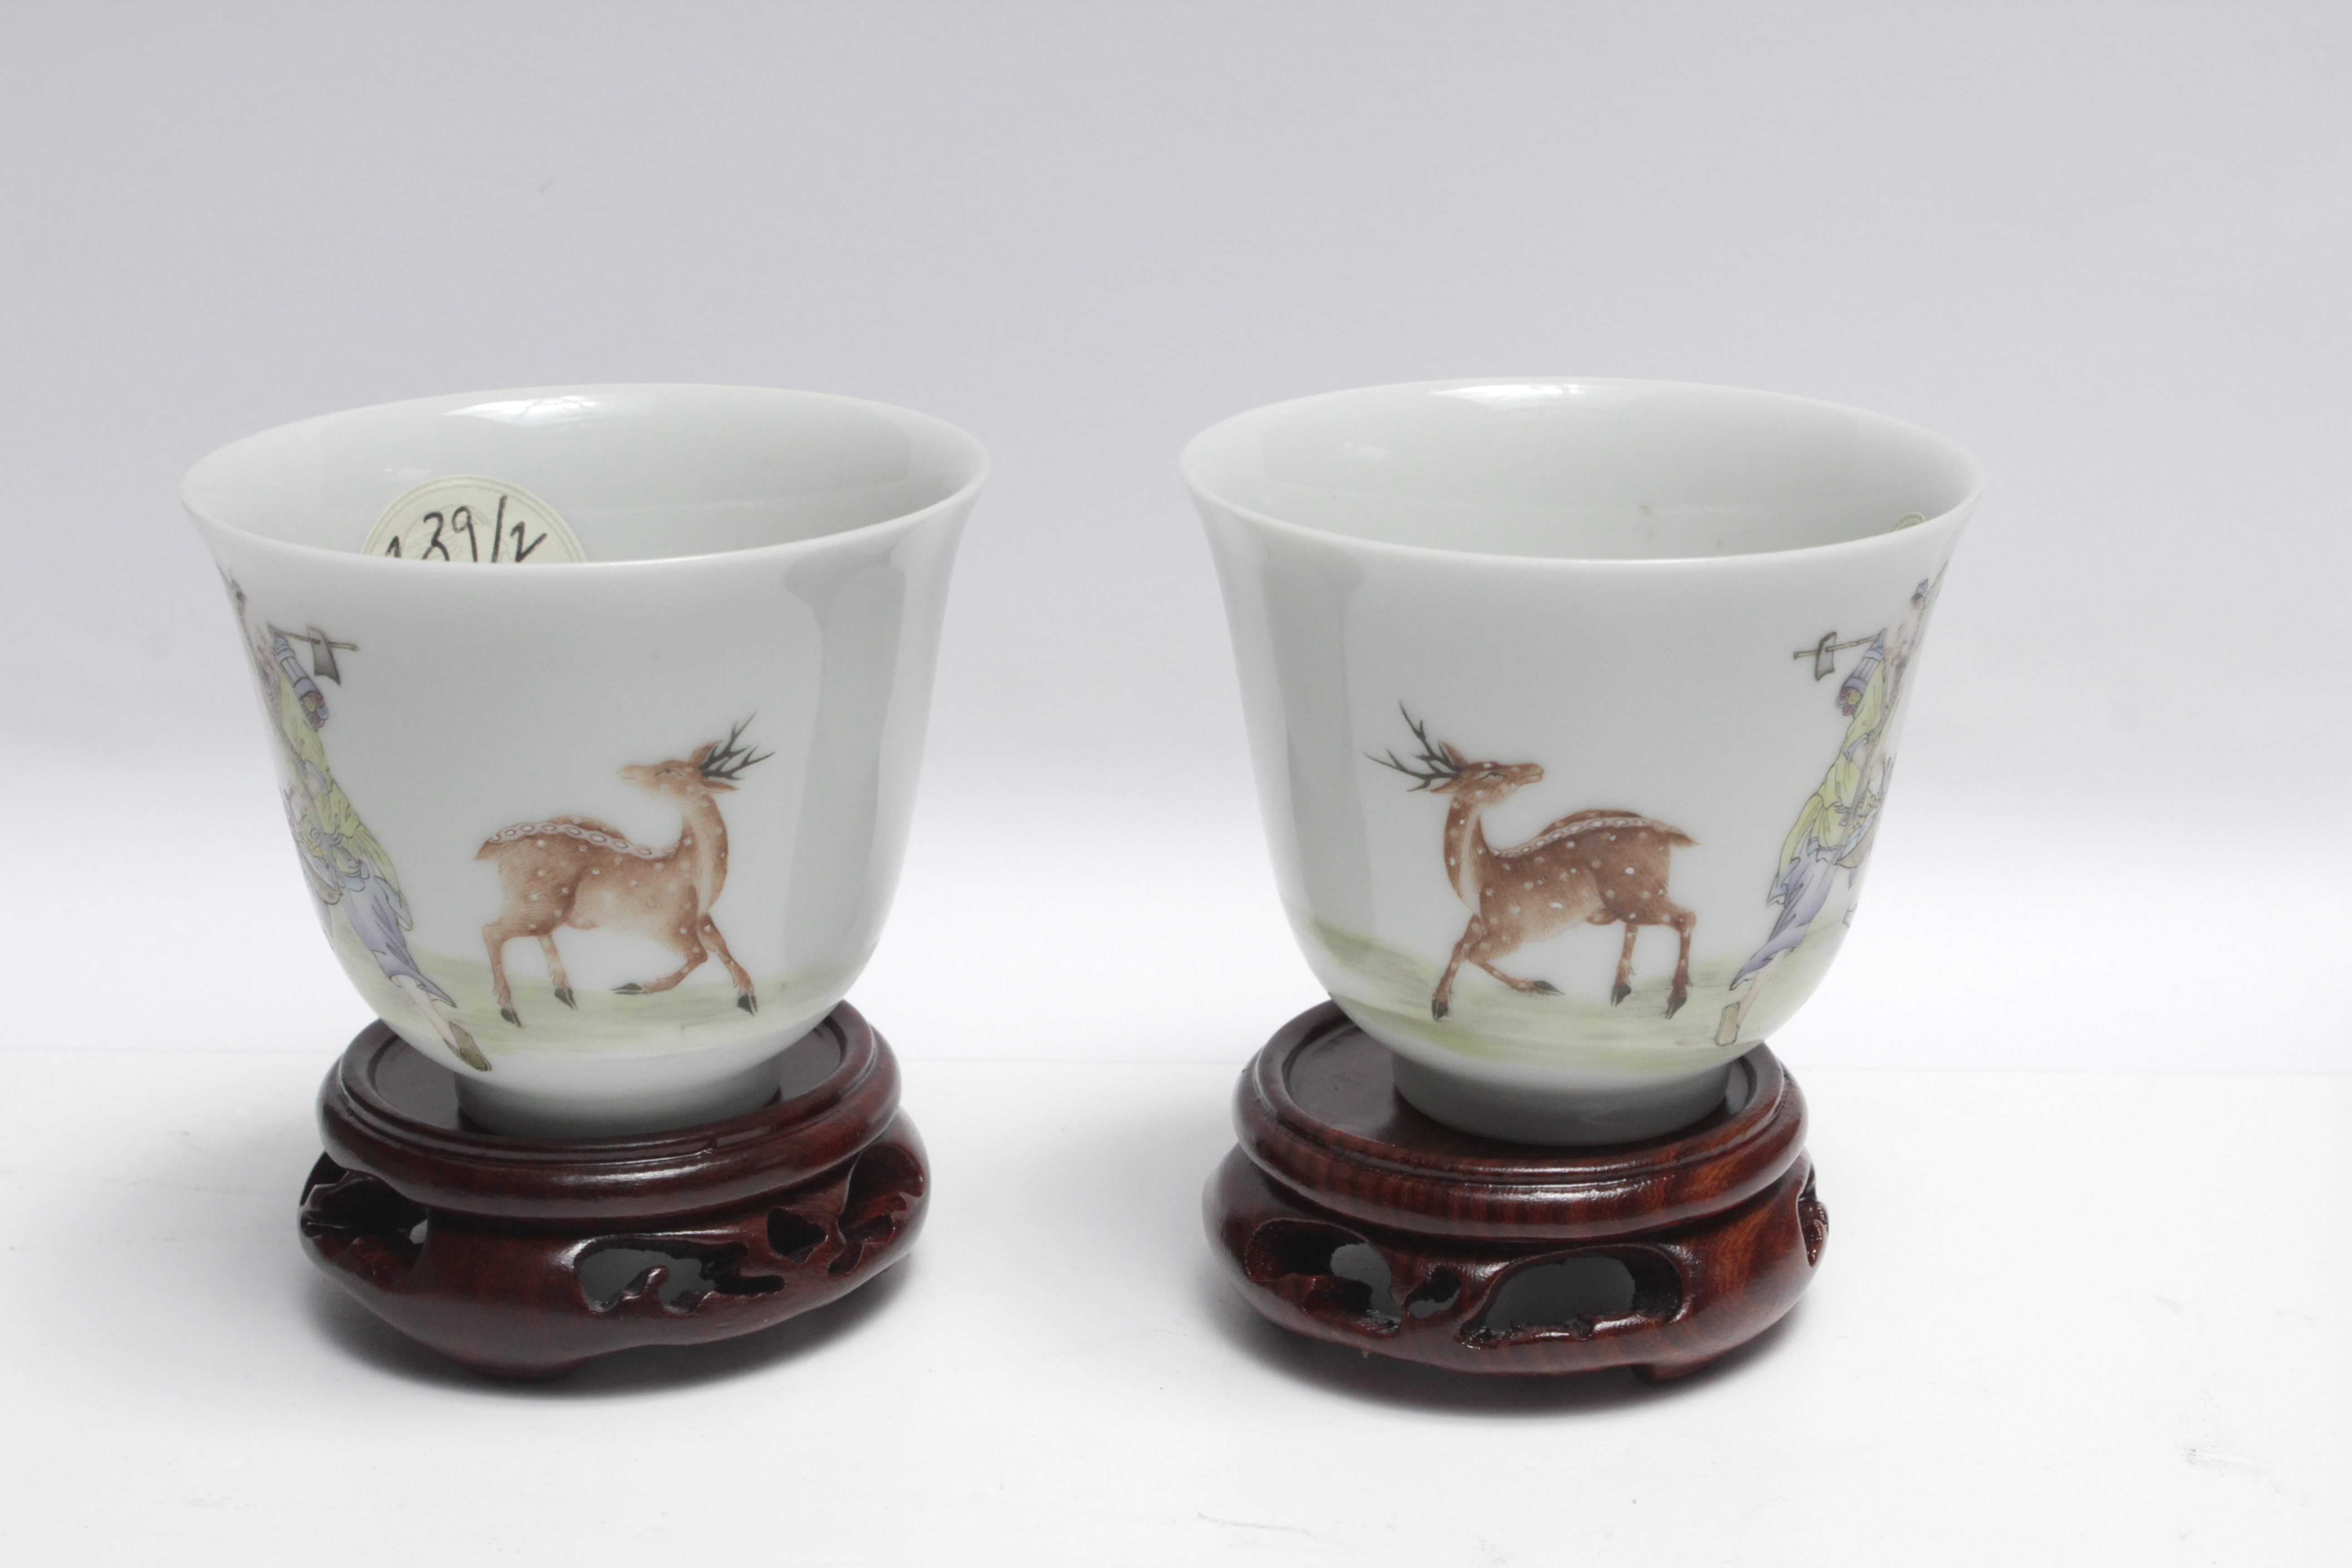 A pair of 19th century Chinese cups in glazed porcelain. Guangxu period and mark